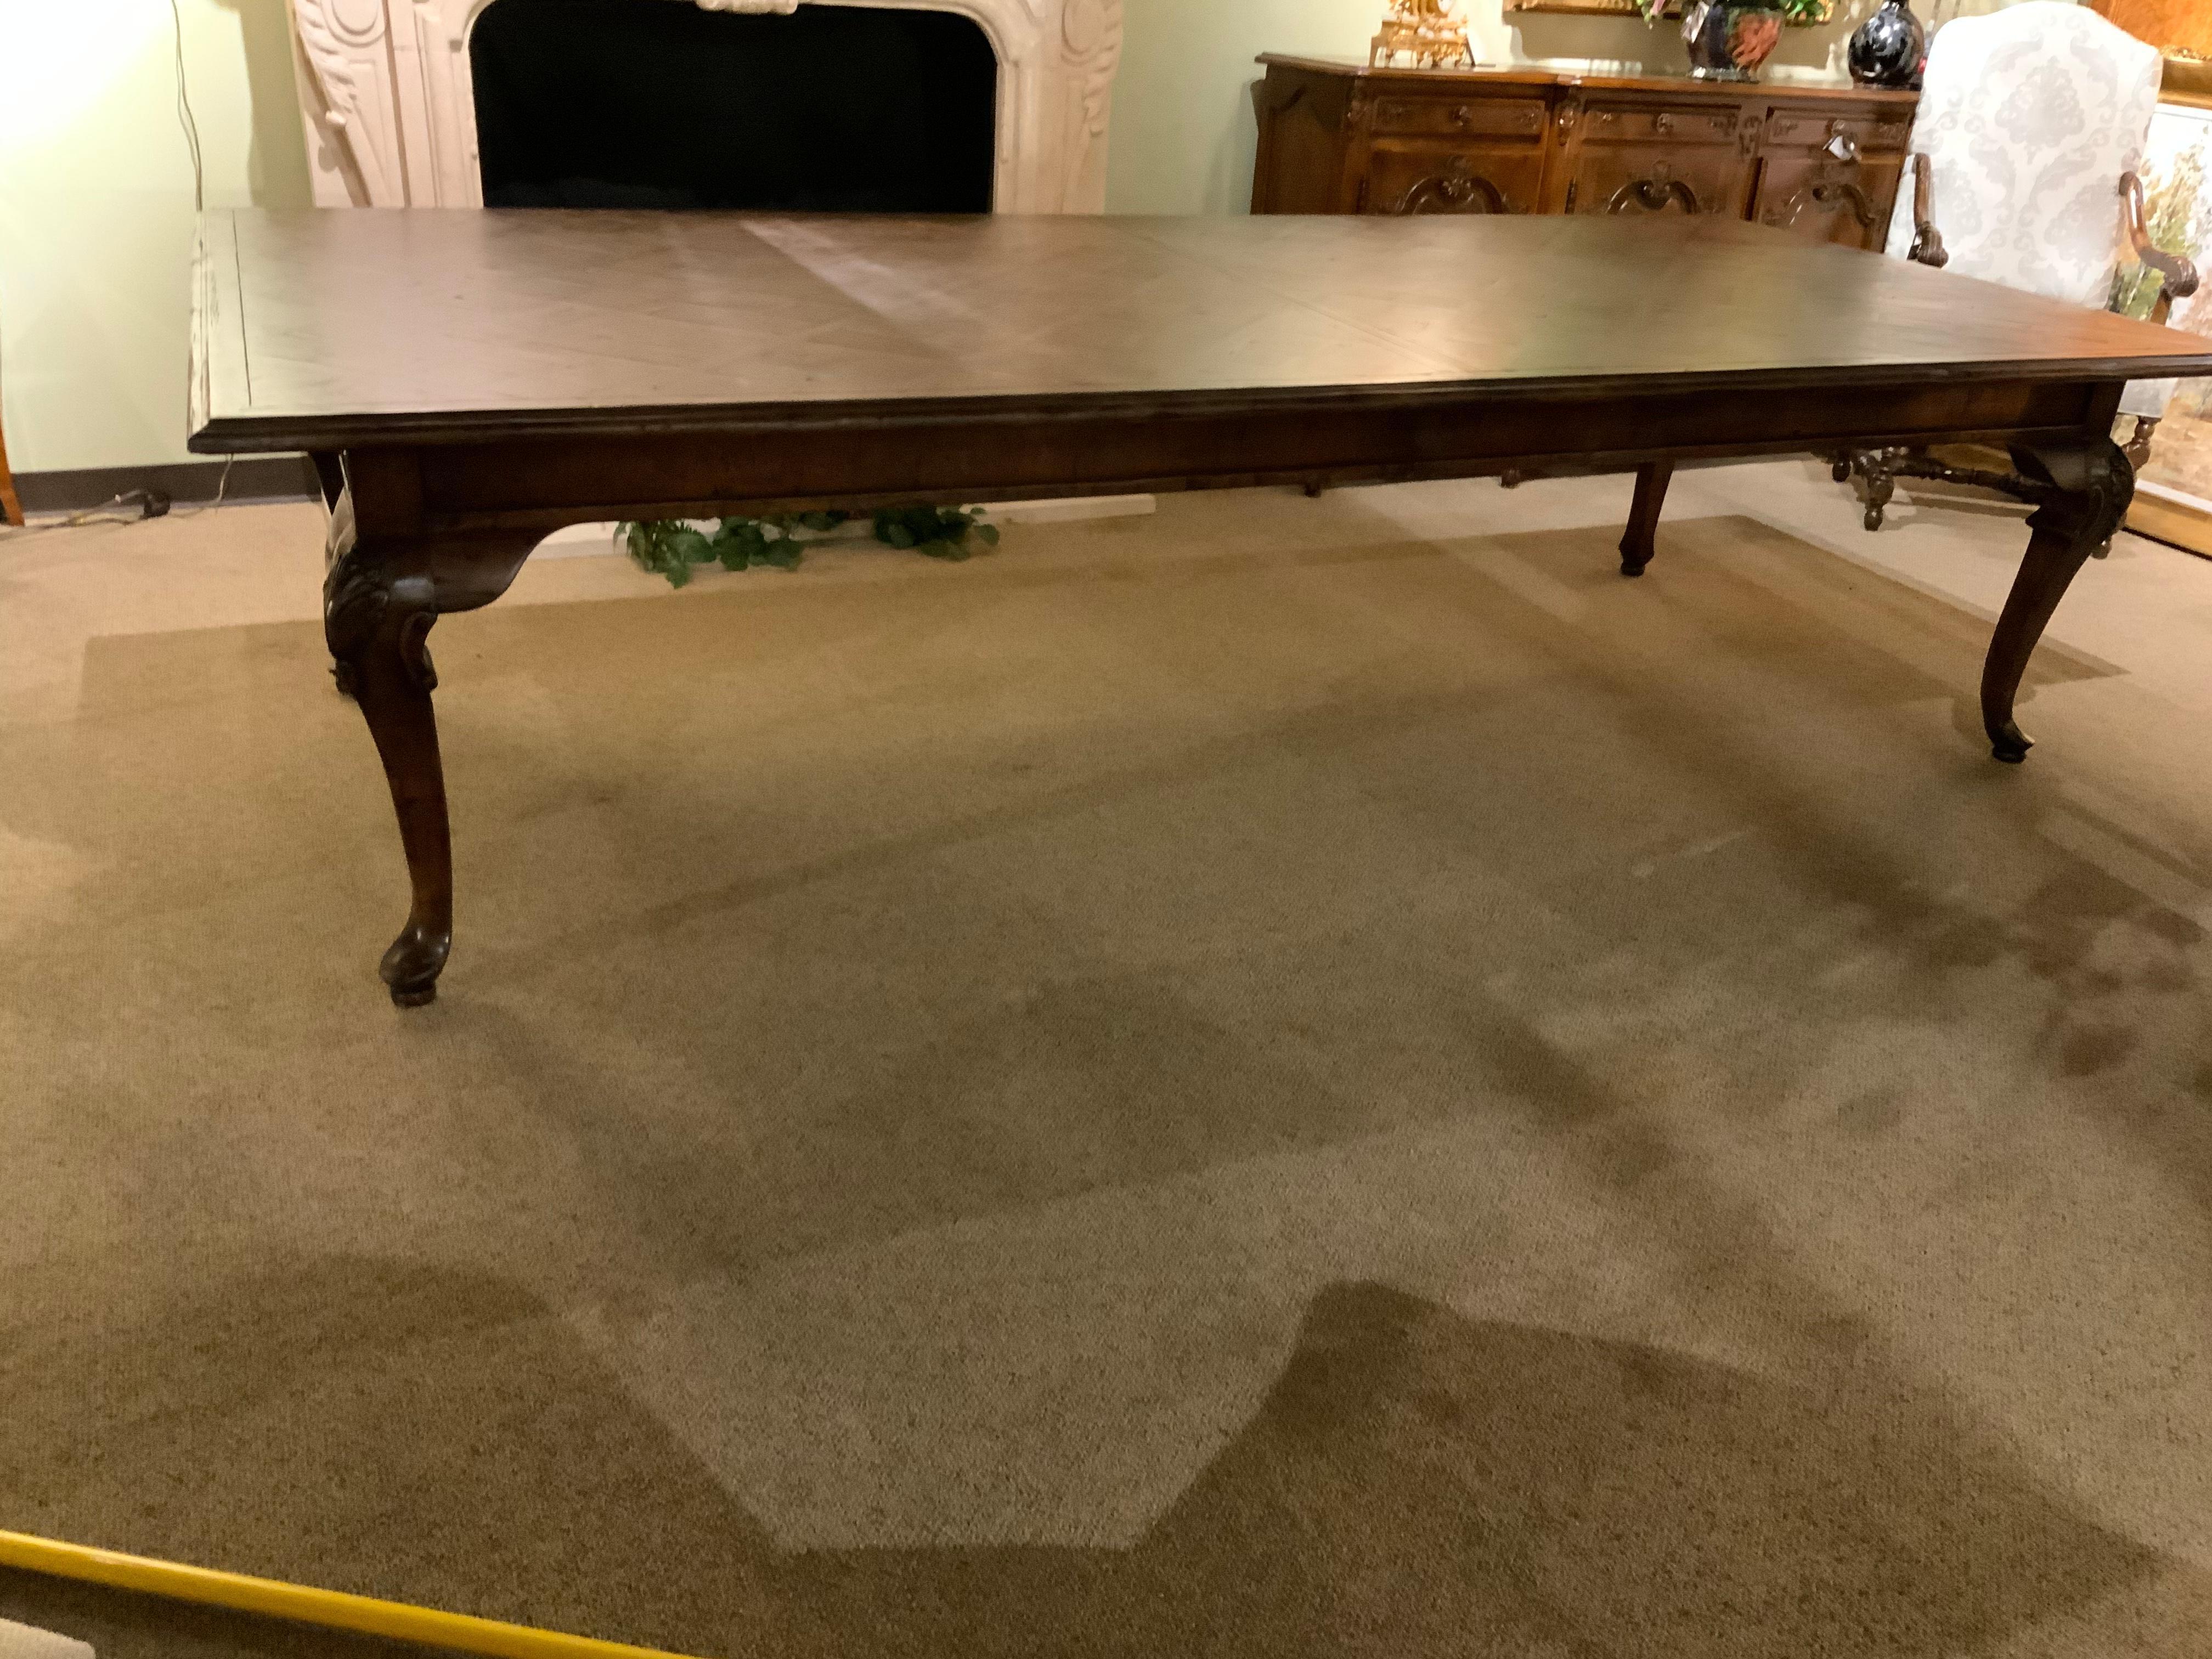 Large and table in great condition with a parquetry top. The legs are curved
With carvings on the knees. This table is 120” long with one additional leaf and measures 144”
Fully extended. The workmanship on this table is exceptional and is great for